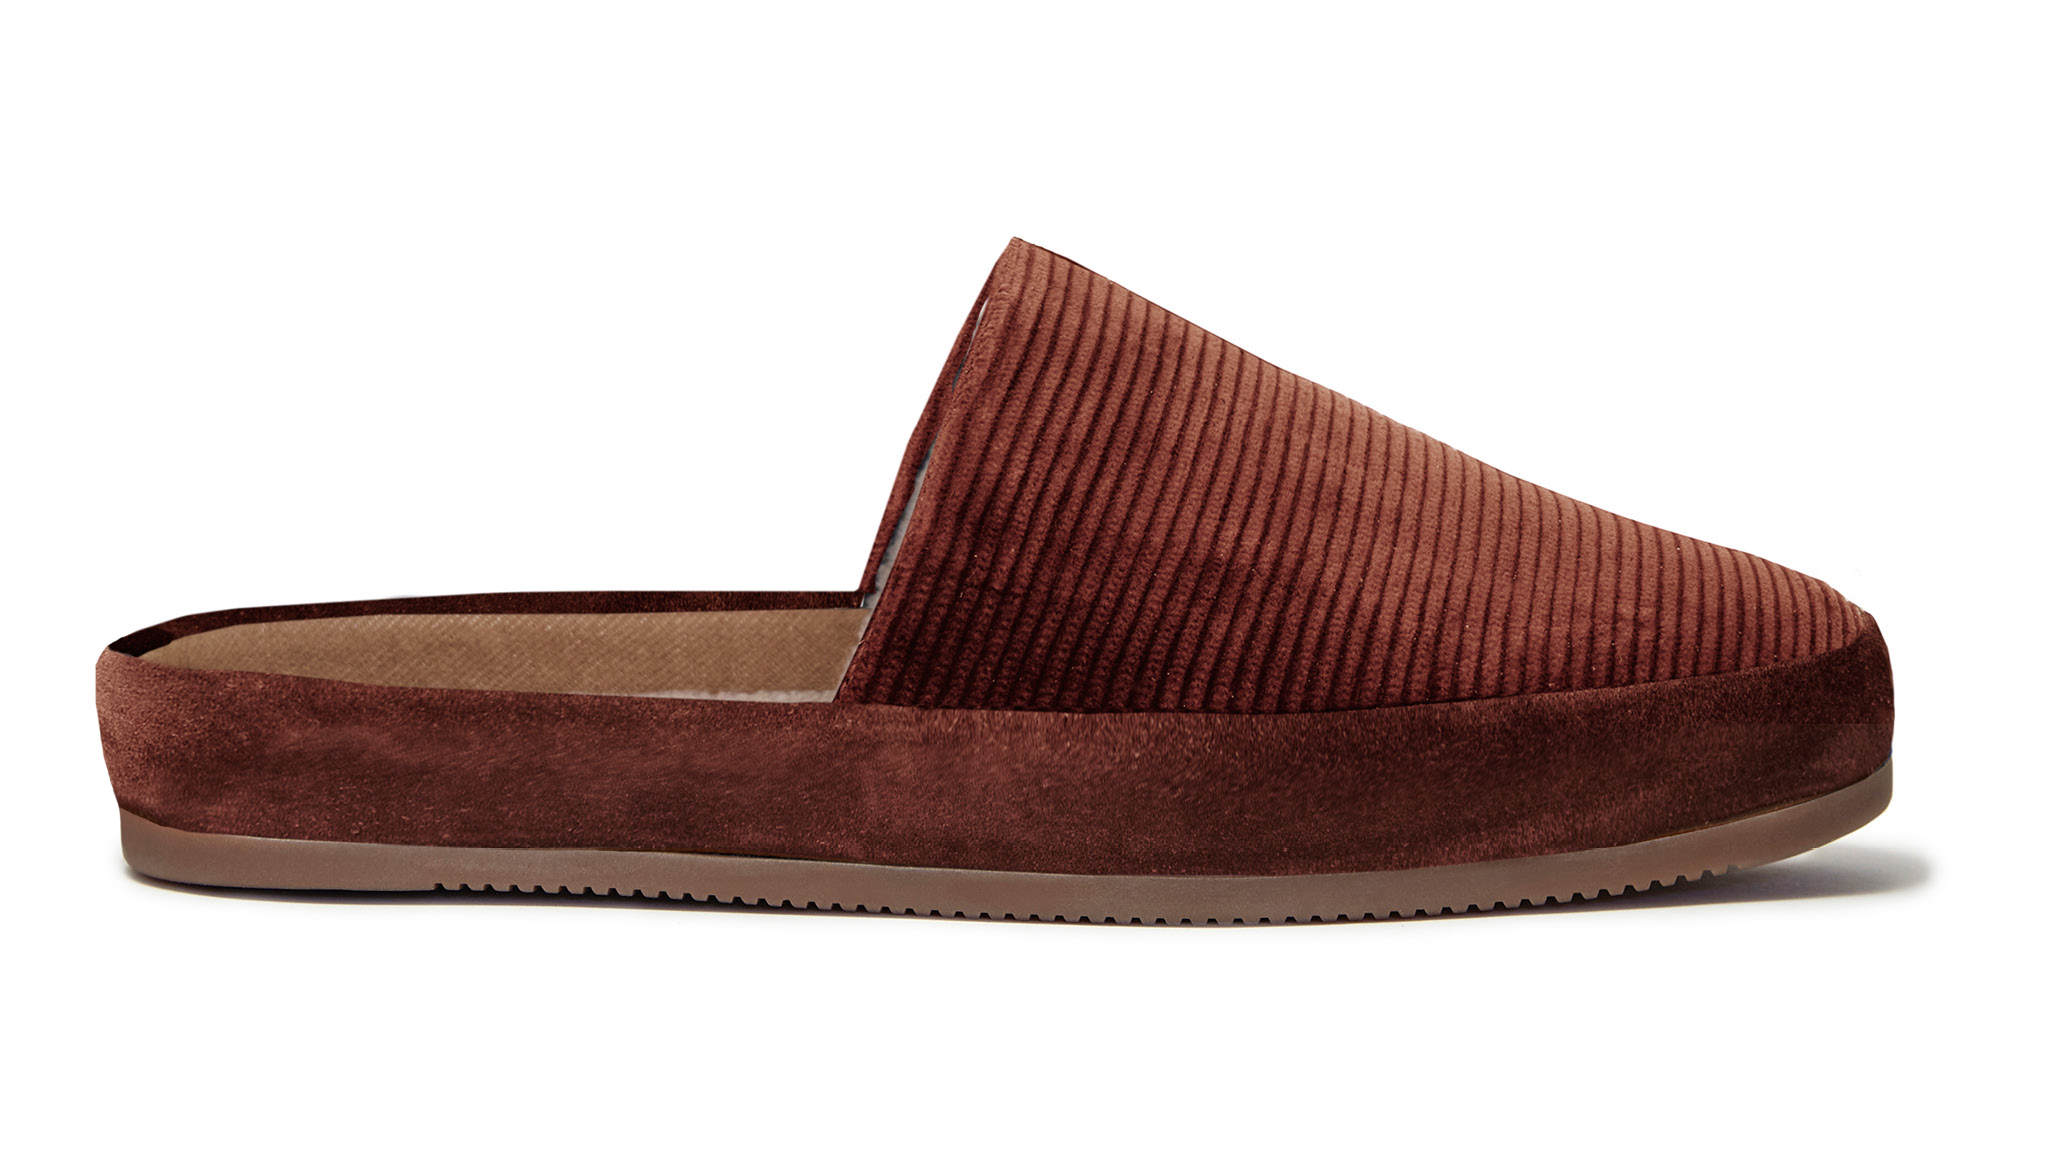 Fleece-lined Slippers - Taupe - Men | H&M US